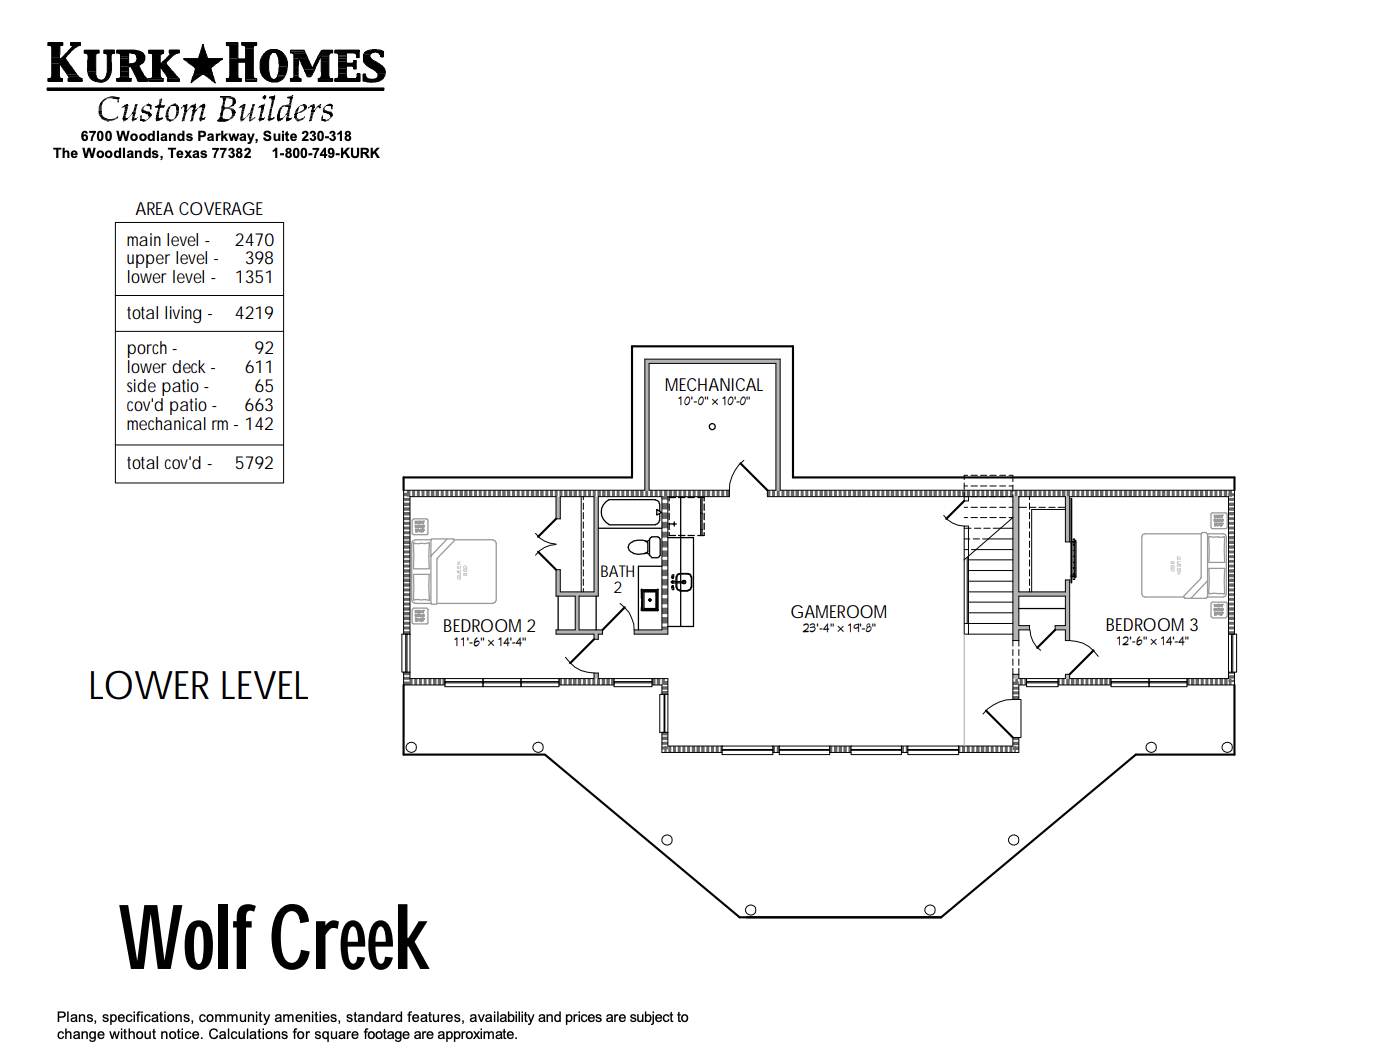 The Wolf Creek - Lower Level